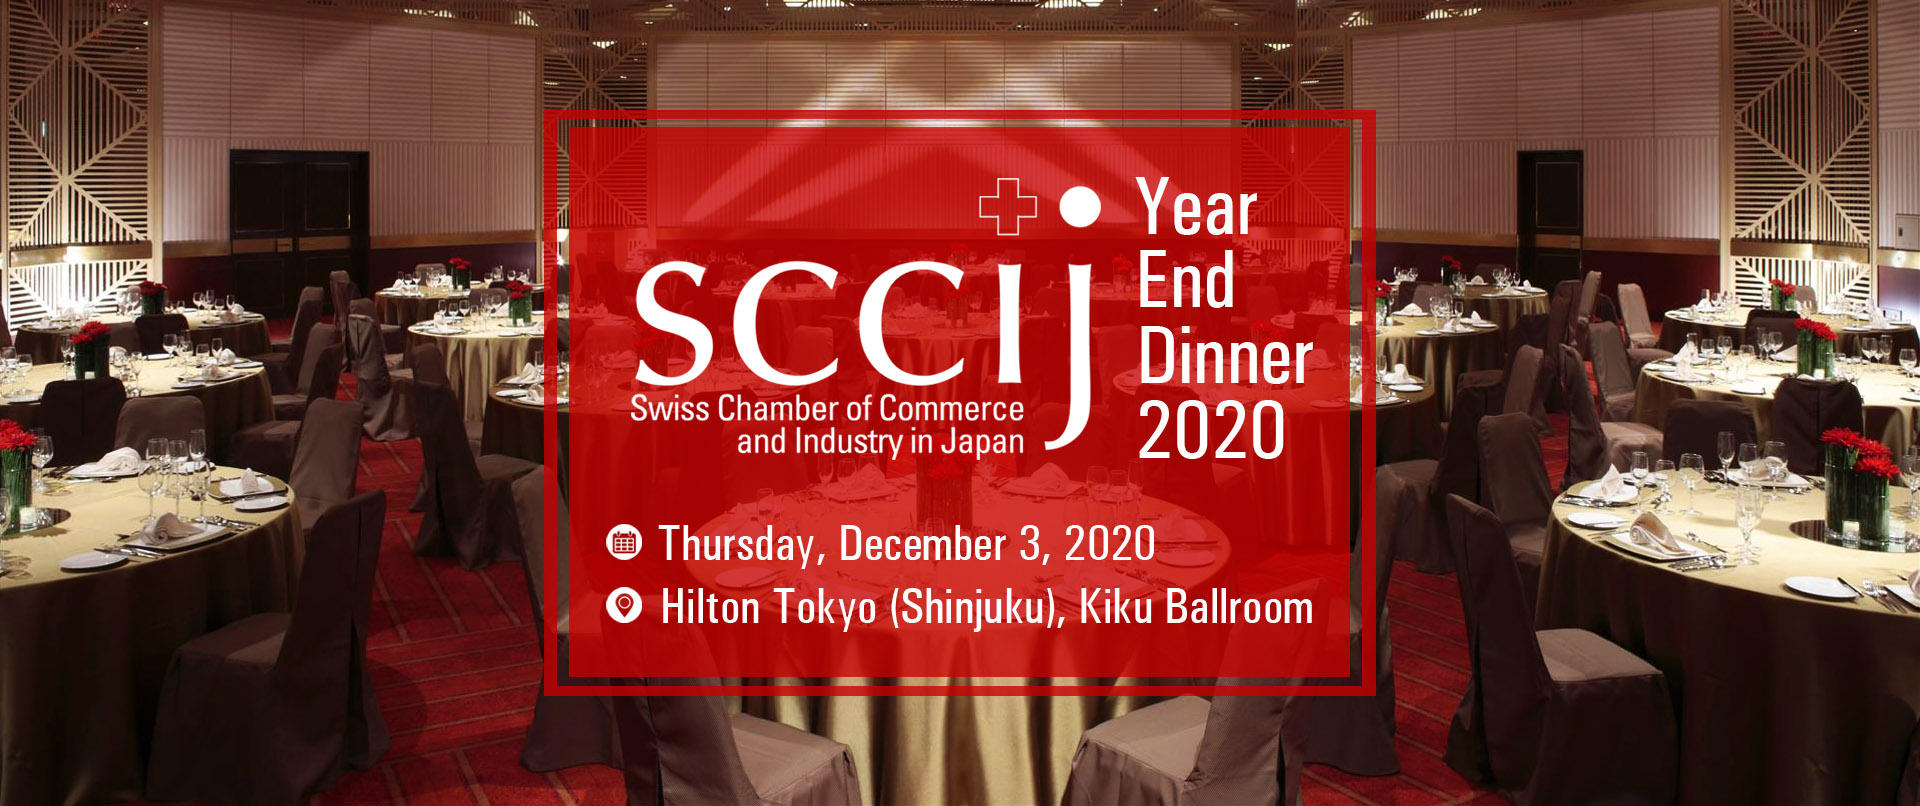 SCCIJ Year End Dinner 2020